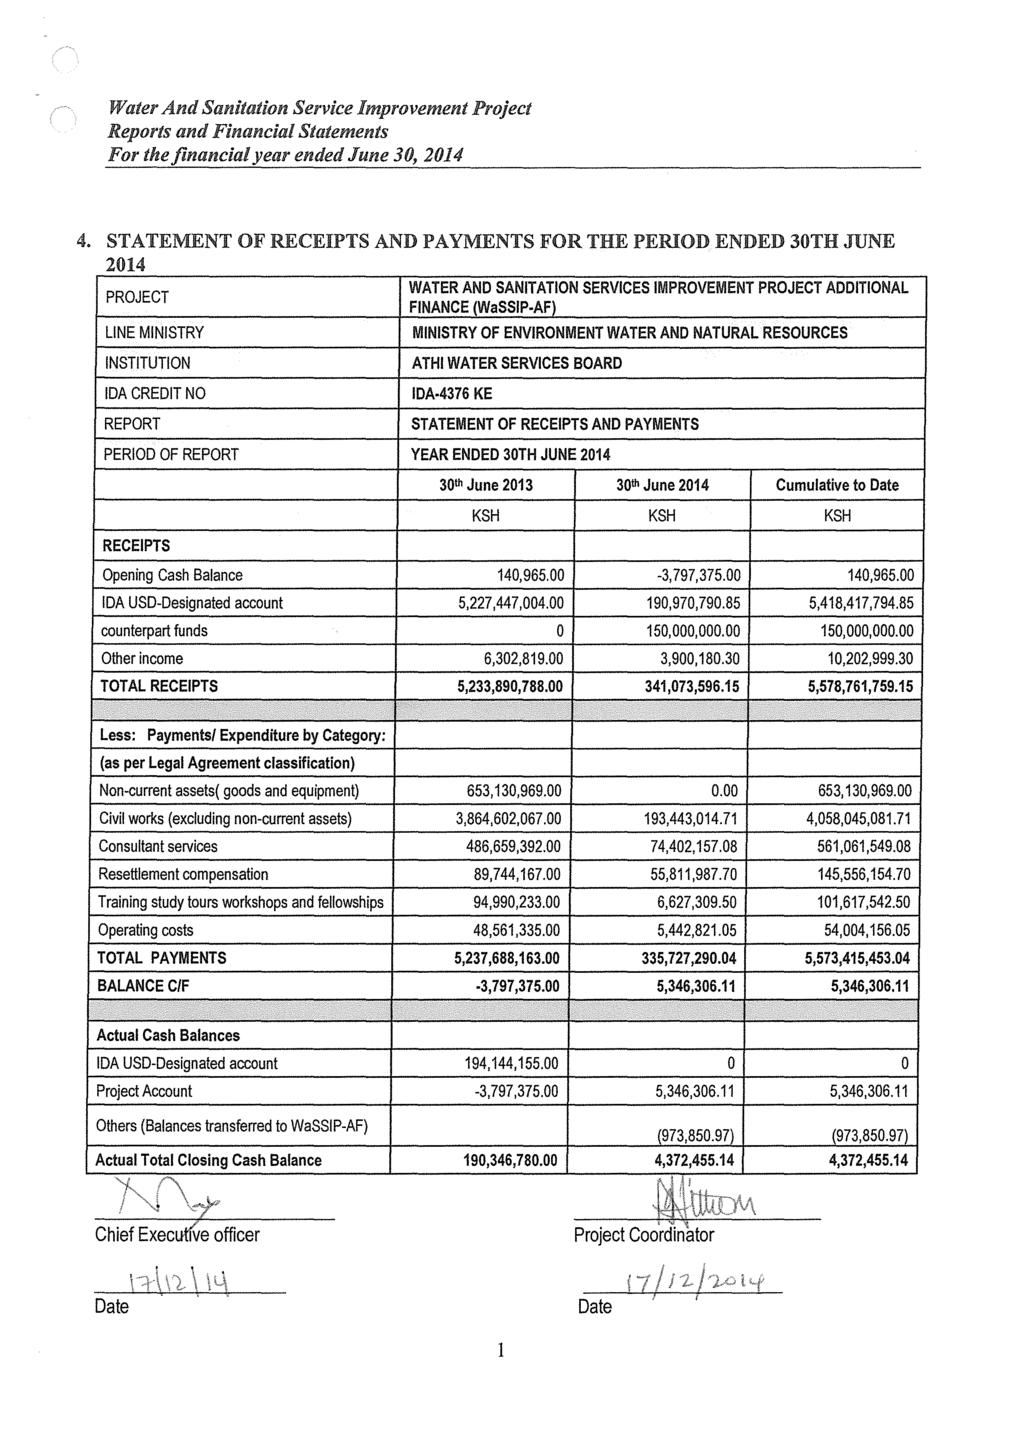 4. STATEMENT OF RECEIPTS AND PAYMENTS FOR THE PERIOD ENDED 30TH JUNE 2014 PROJECT LINE MINISTRY INSTITUTION IDA CREDIT NO REPORT WATER AND SANITATION SERVICES IMPROVEMENT PROJECT ADDITIONAL FINANCE